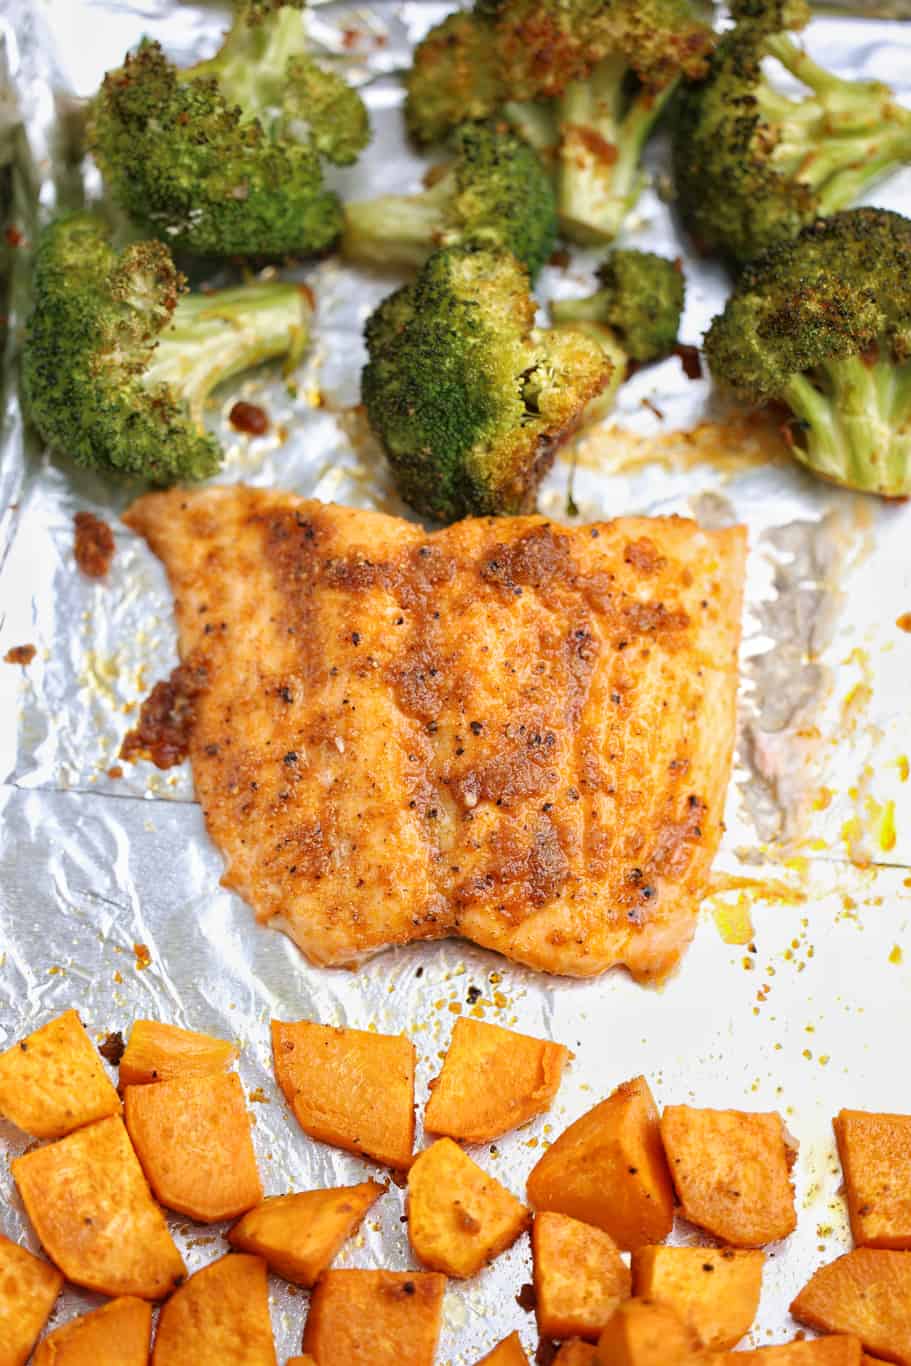 salmon filet with sweet potatoes and broccoli on the baking tray